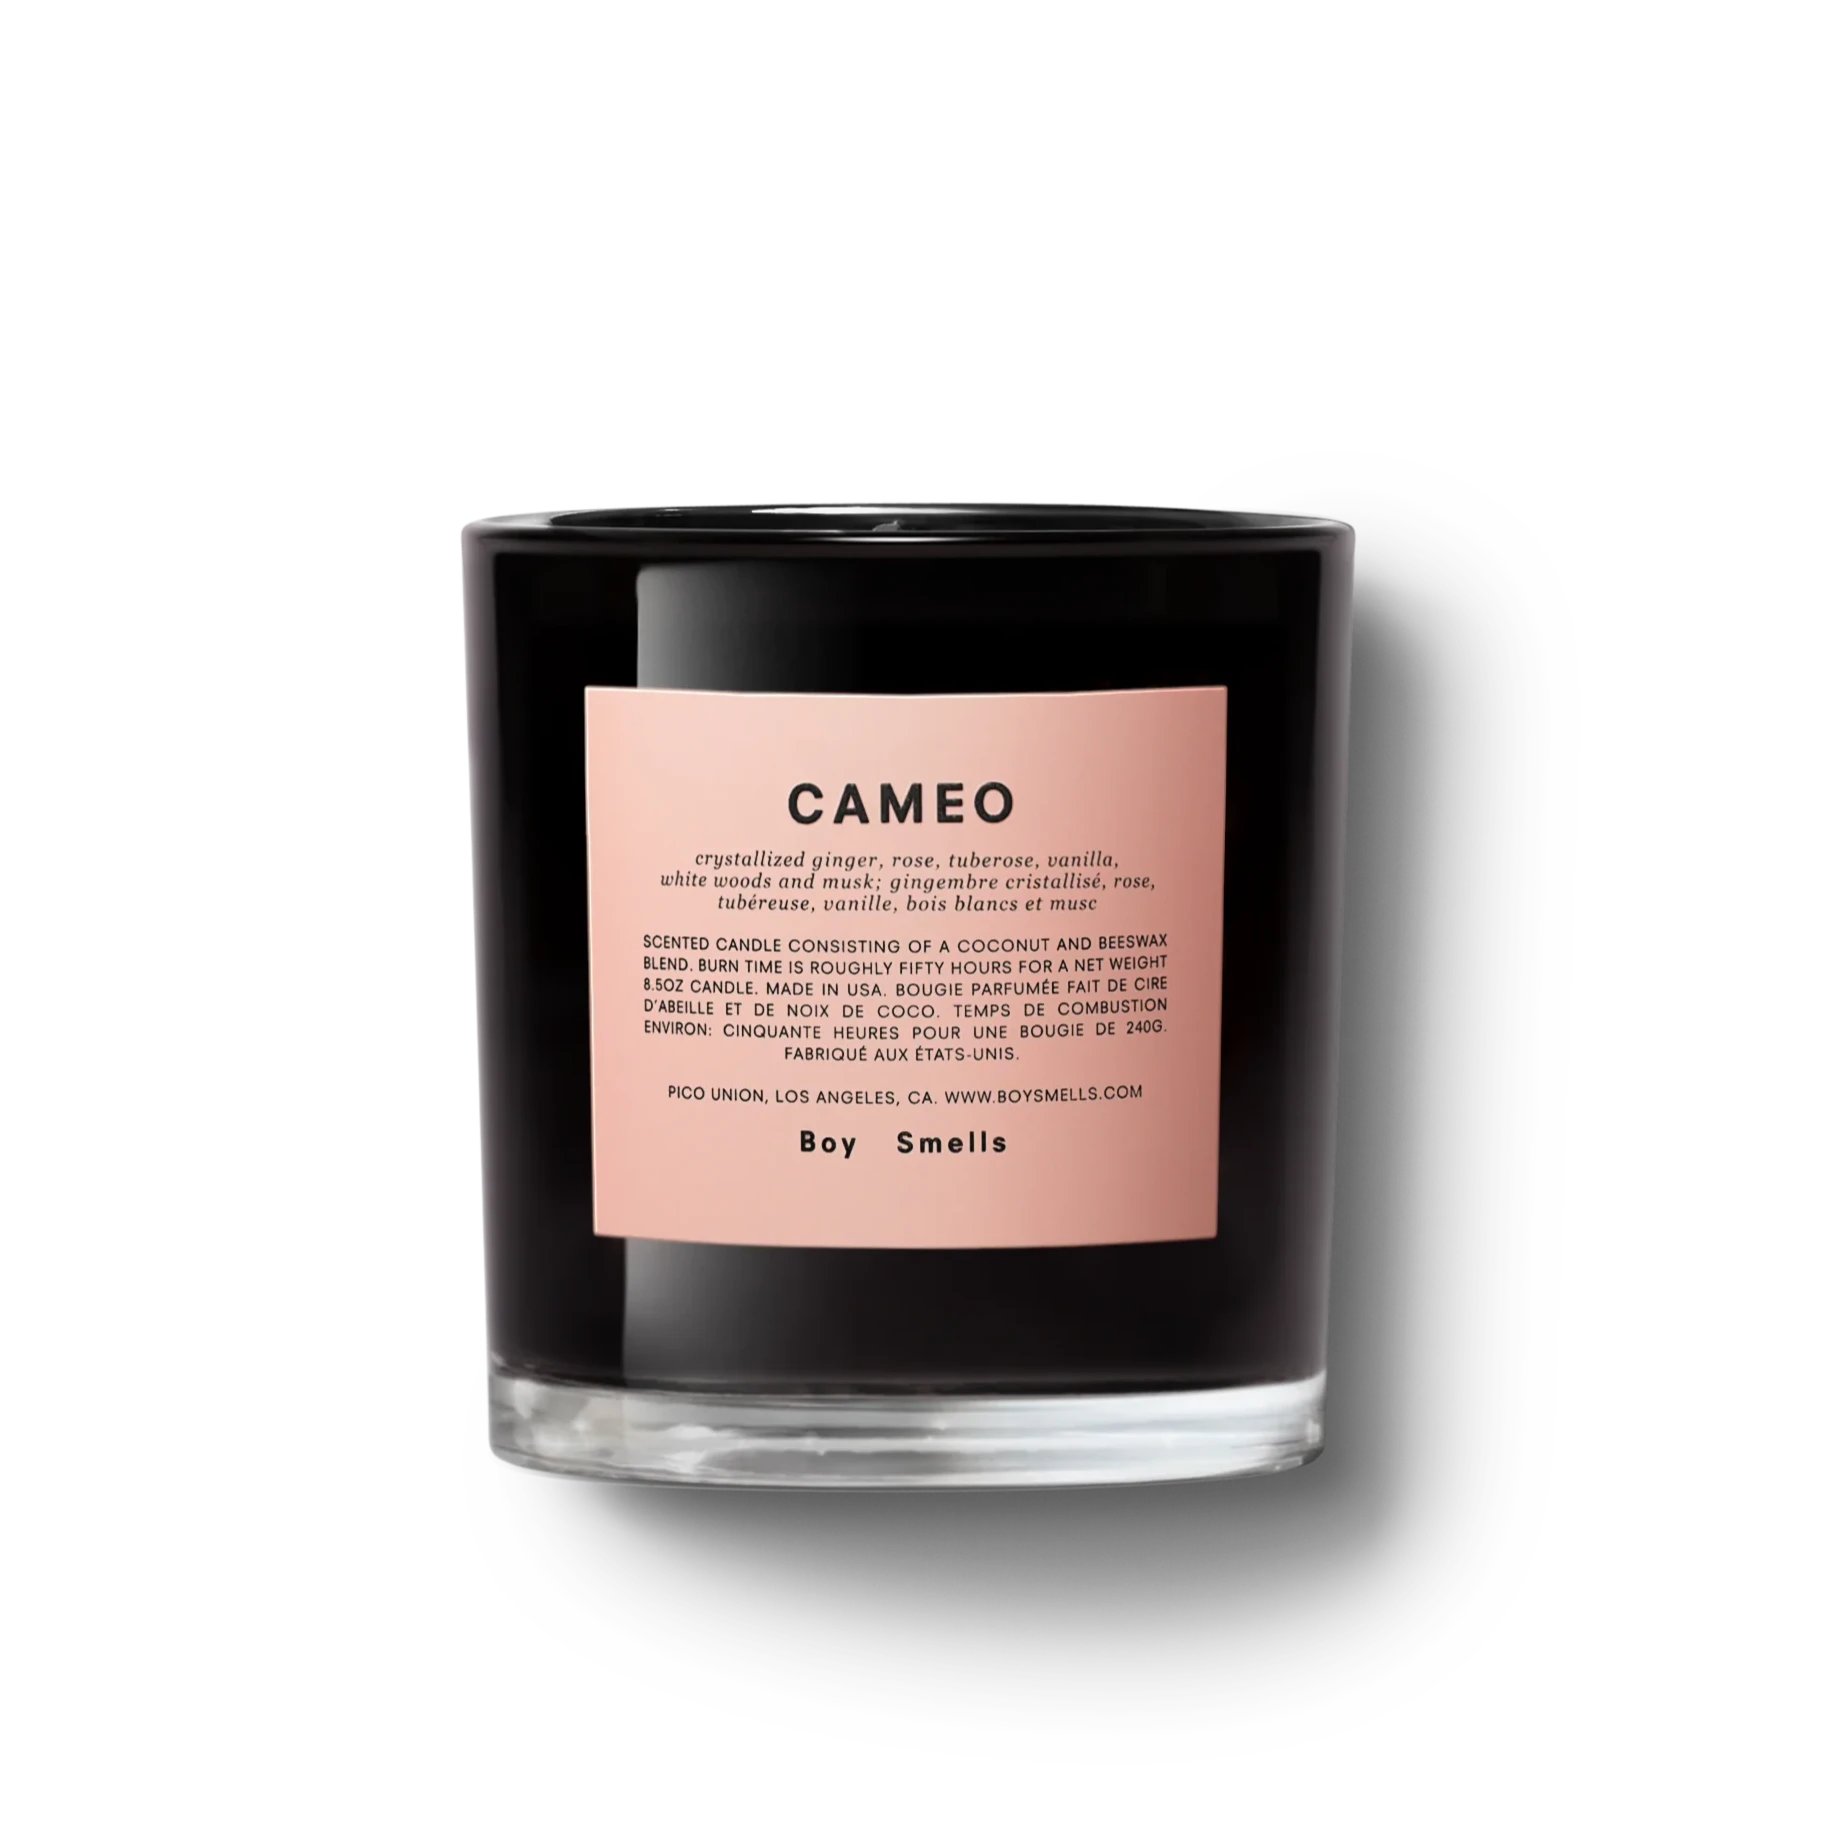 glossy black glass candle with pink label in the front. label has black text 